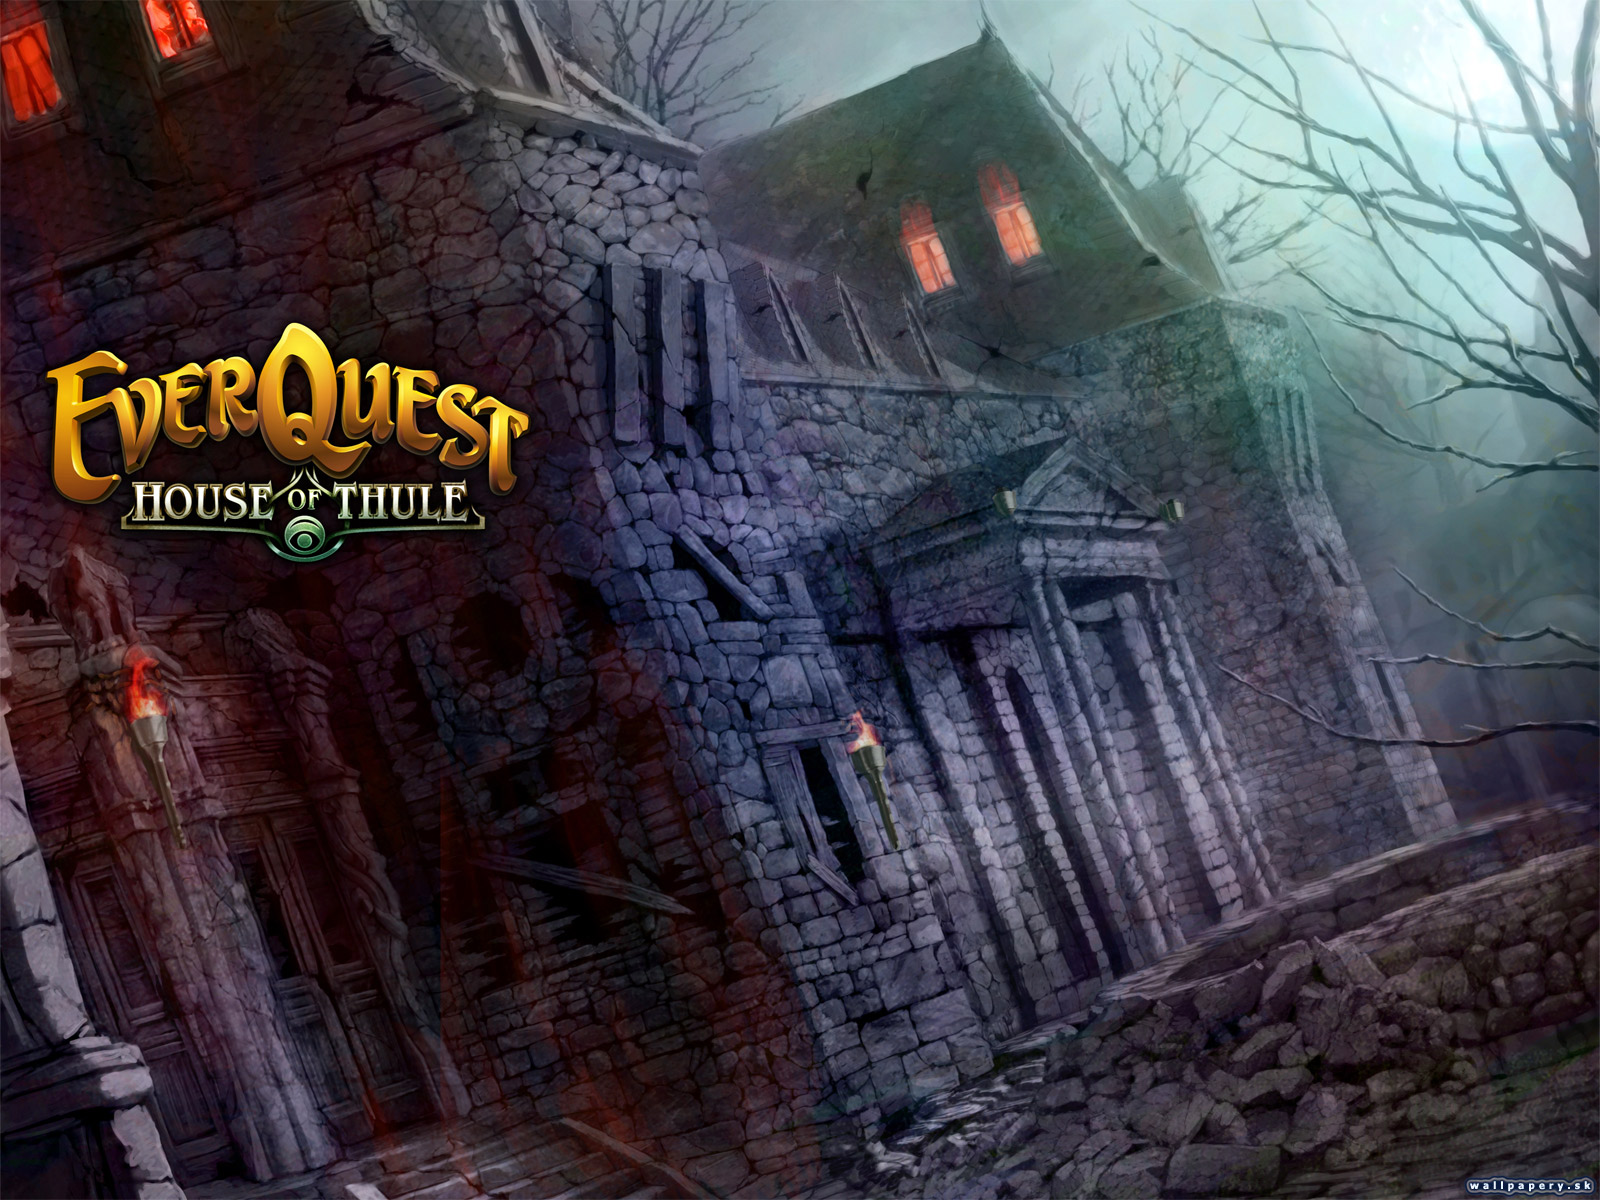 EverQuest: House of Thule - wallpaper 2